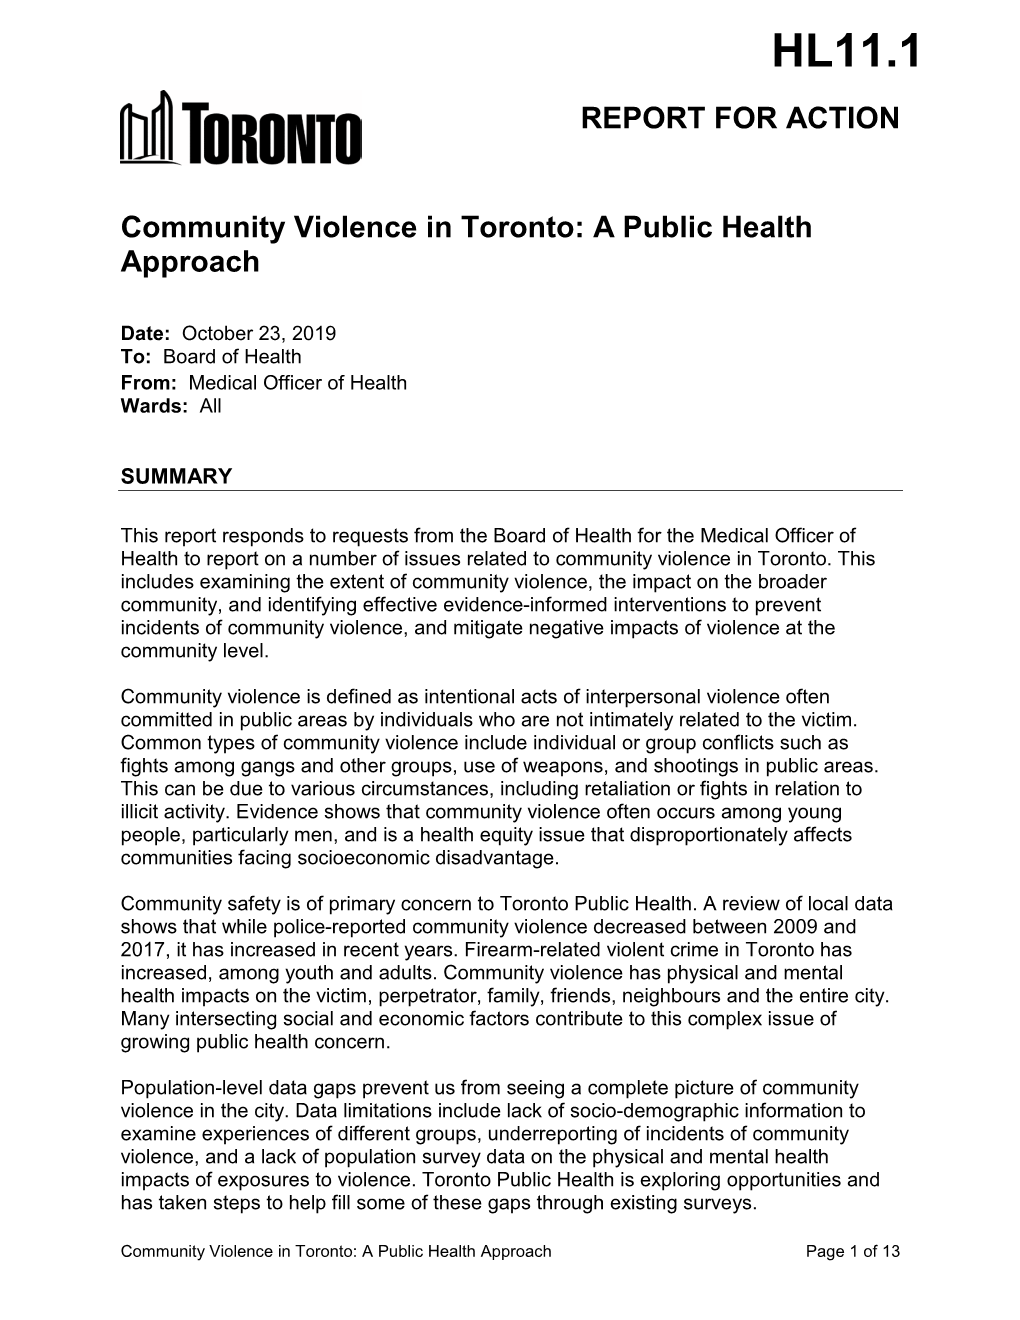 Community Violence in Toronto: a Public Health Approach